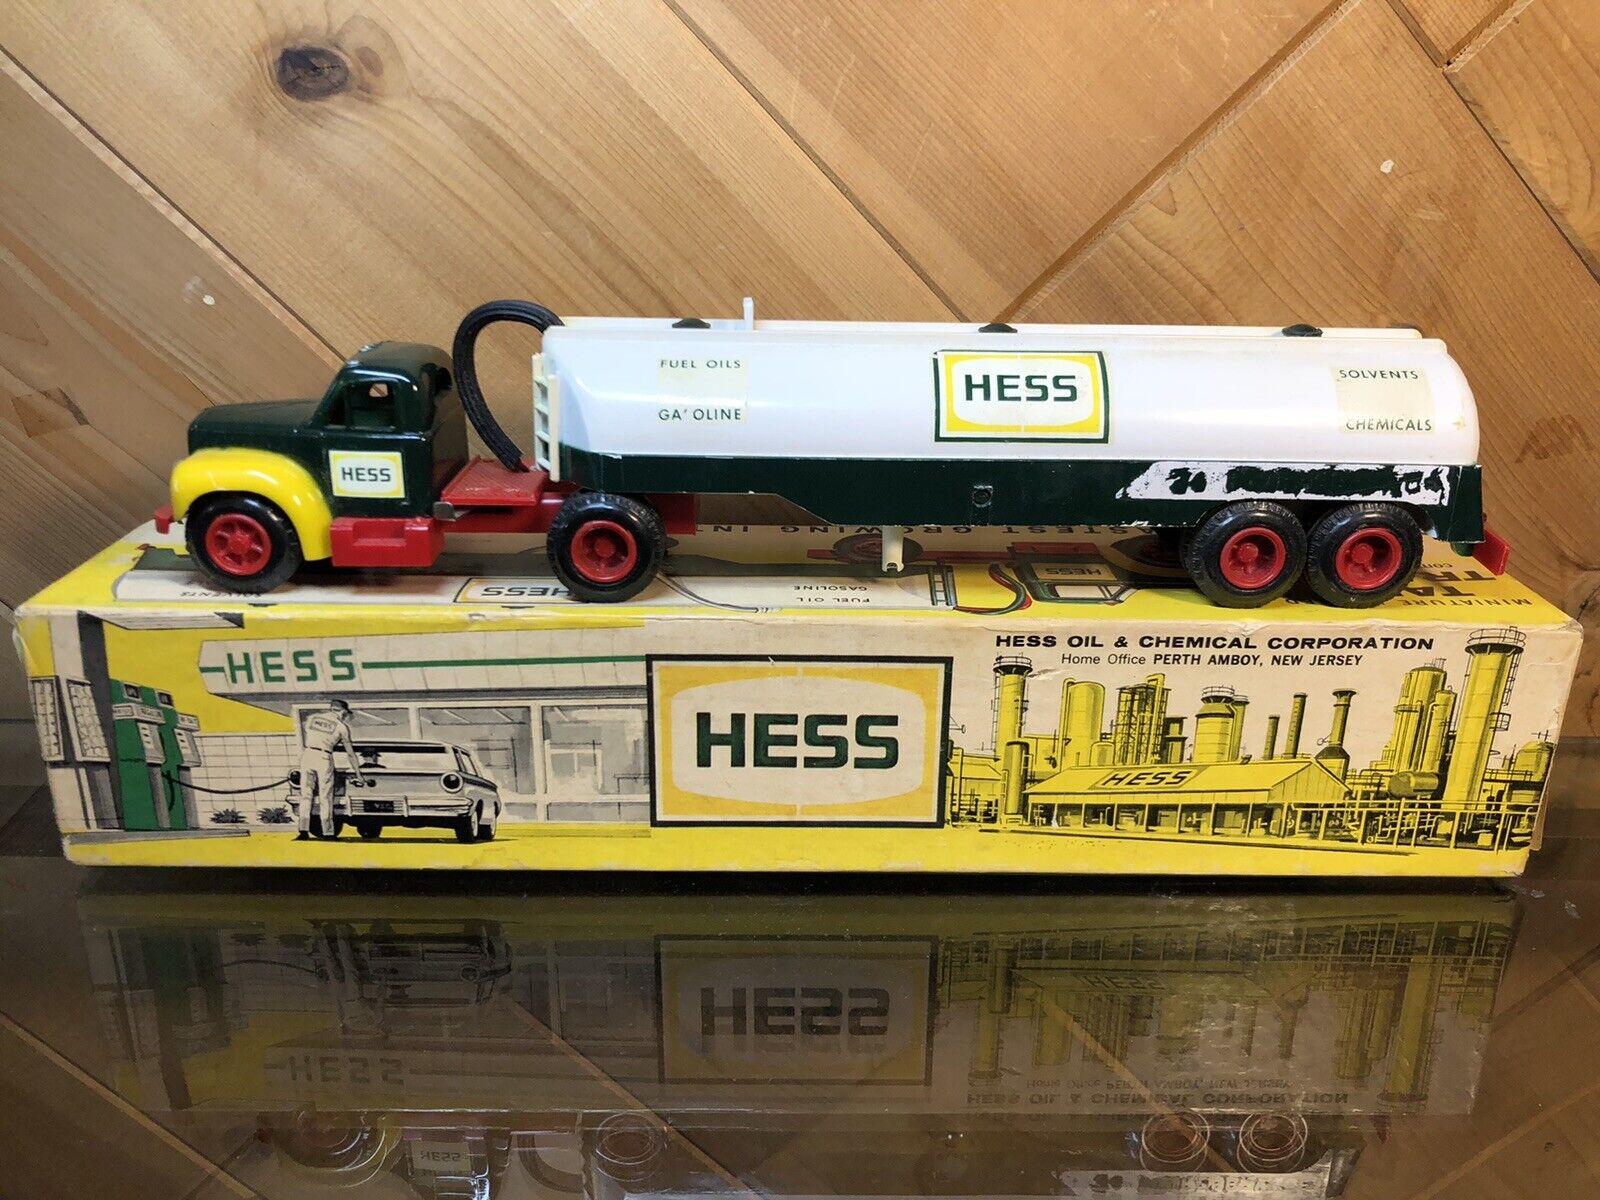 1964 Marx Hess Toy Tanker Truck in Original Box - Taillights Work Good Condition